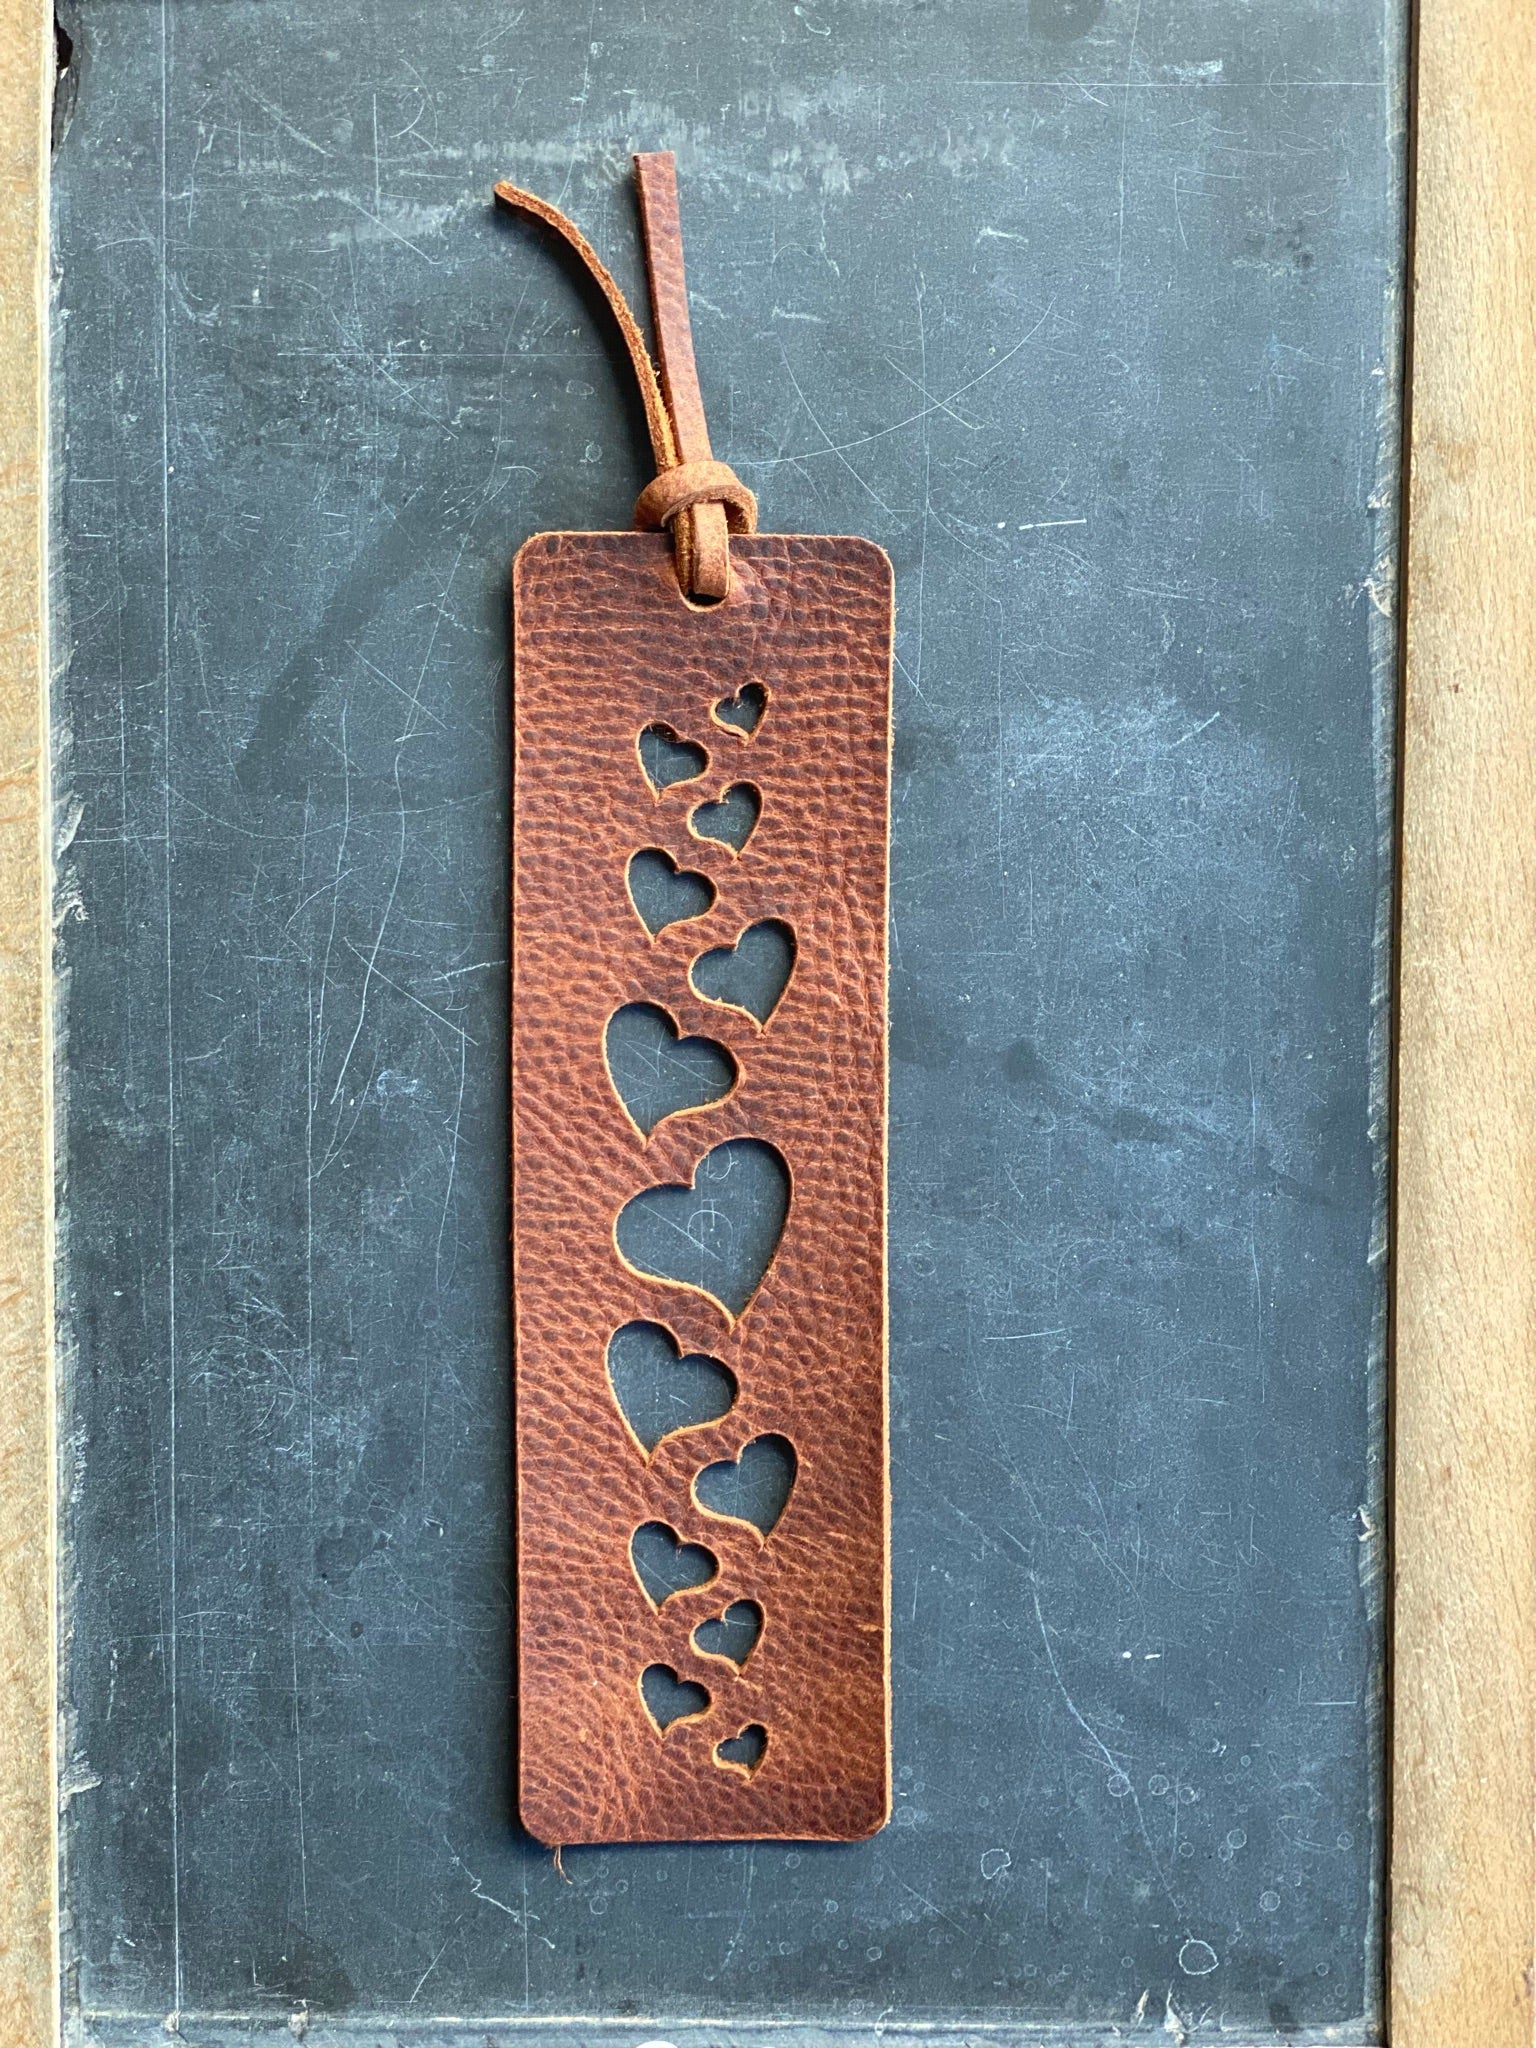 Cascading Hearts Leather Book Marker, Leather Book Mark, Heart Cut Out Leather Bookmarker